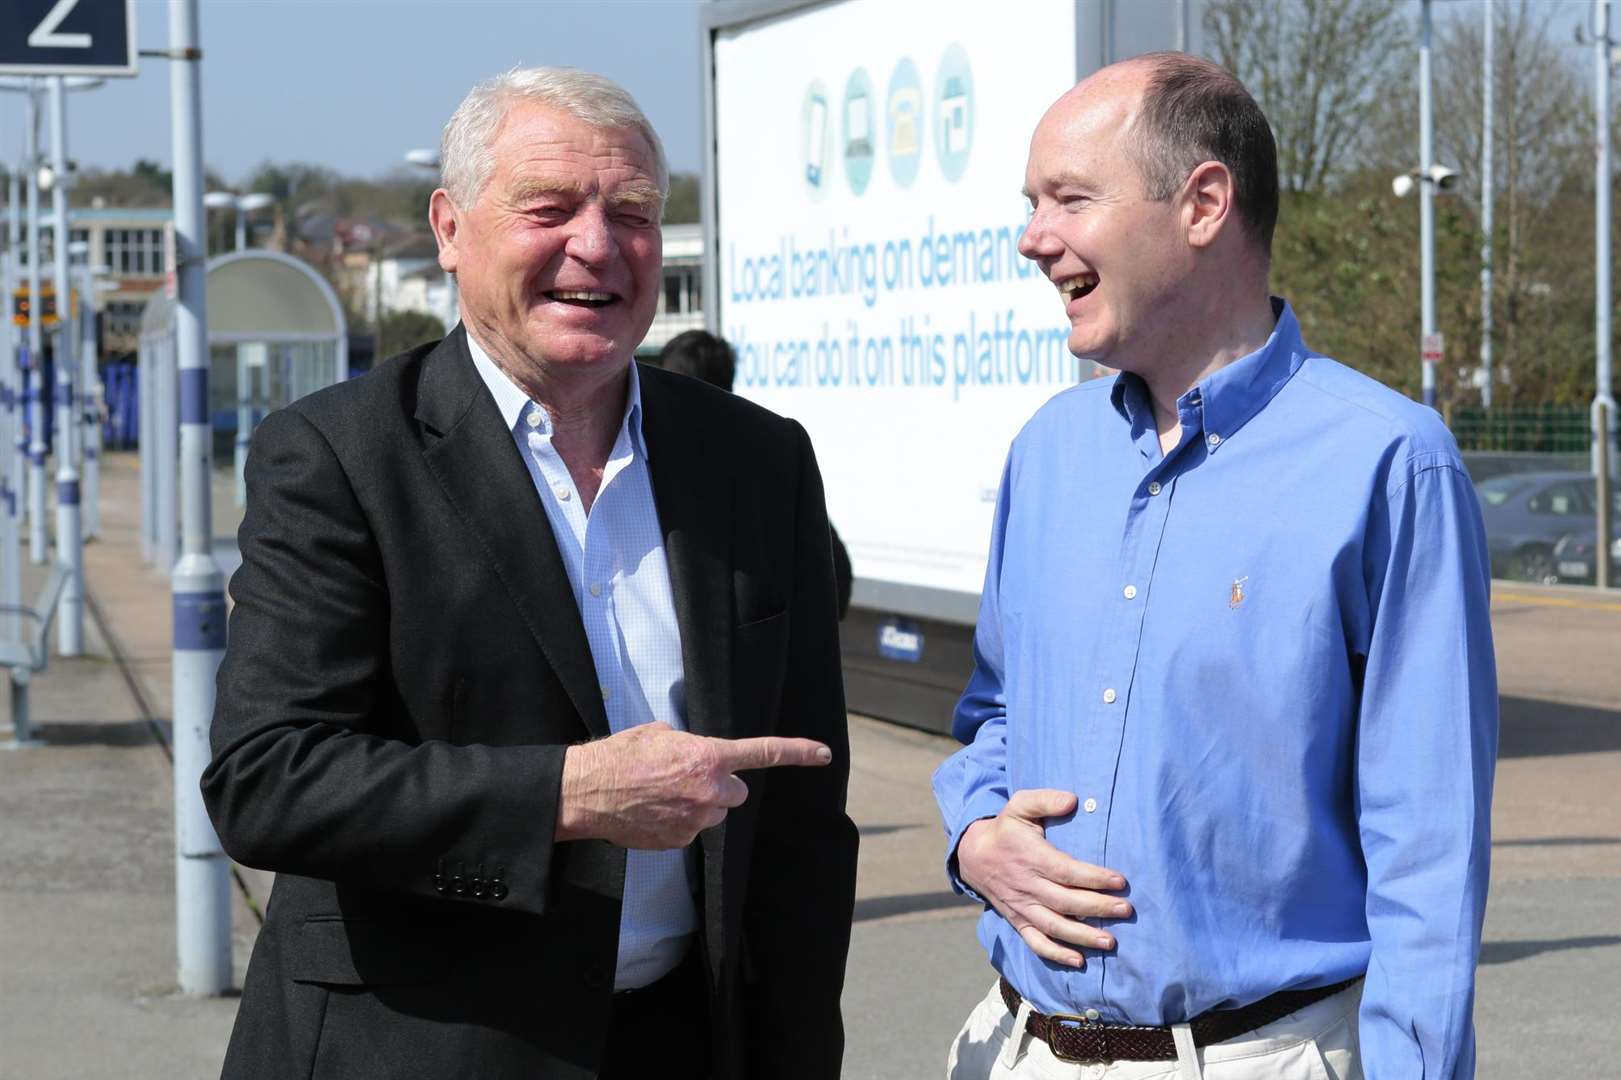 Paddy Ashdown on a visit to Maidstone in 2015 supporting Liberal Democrat candidate Jasper Gerrard. Picture: Martin Apps